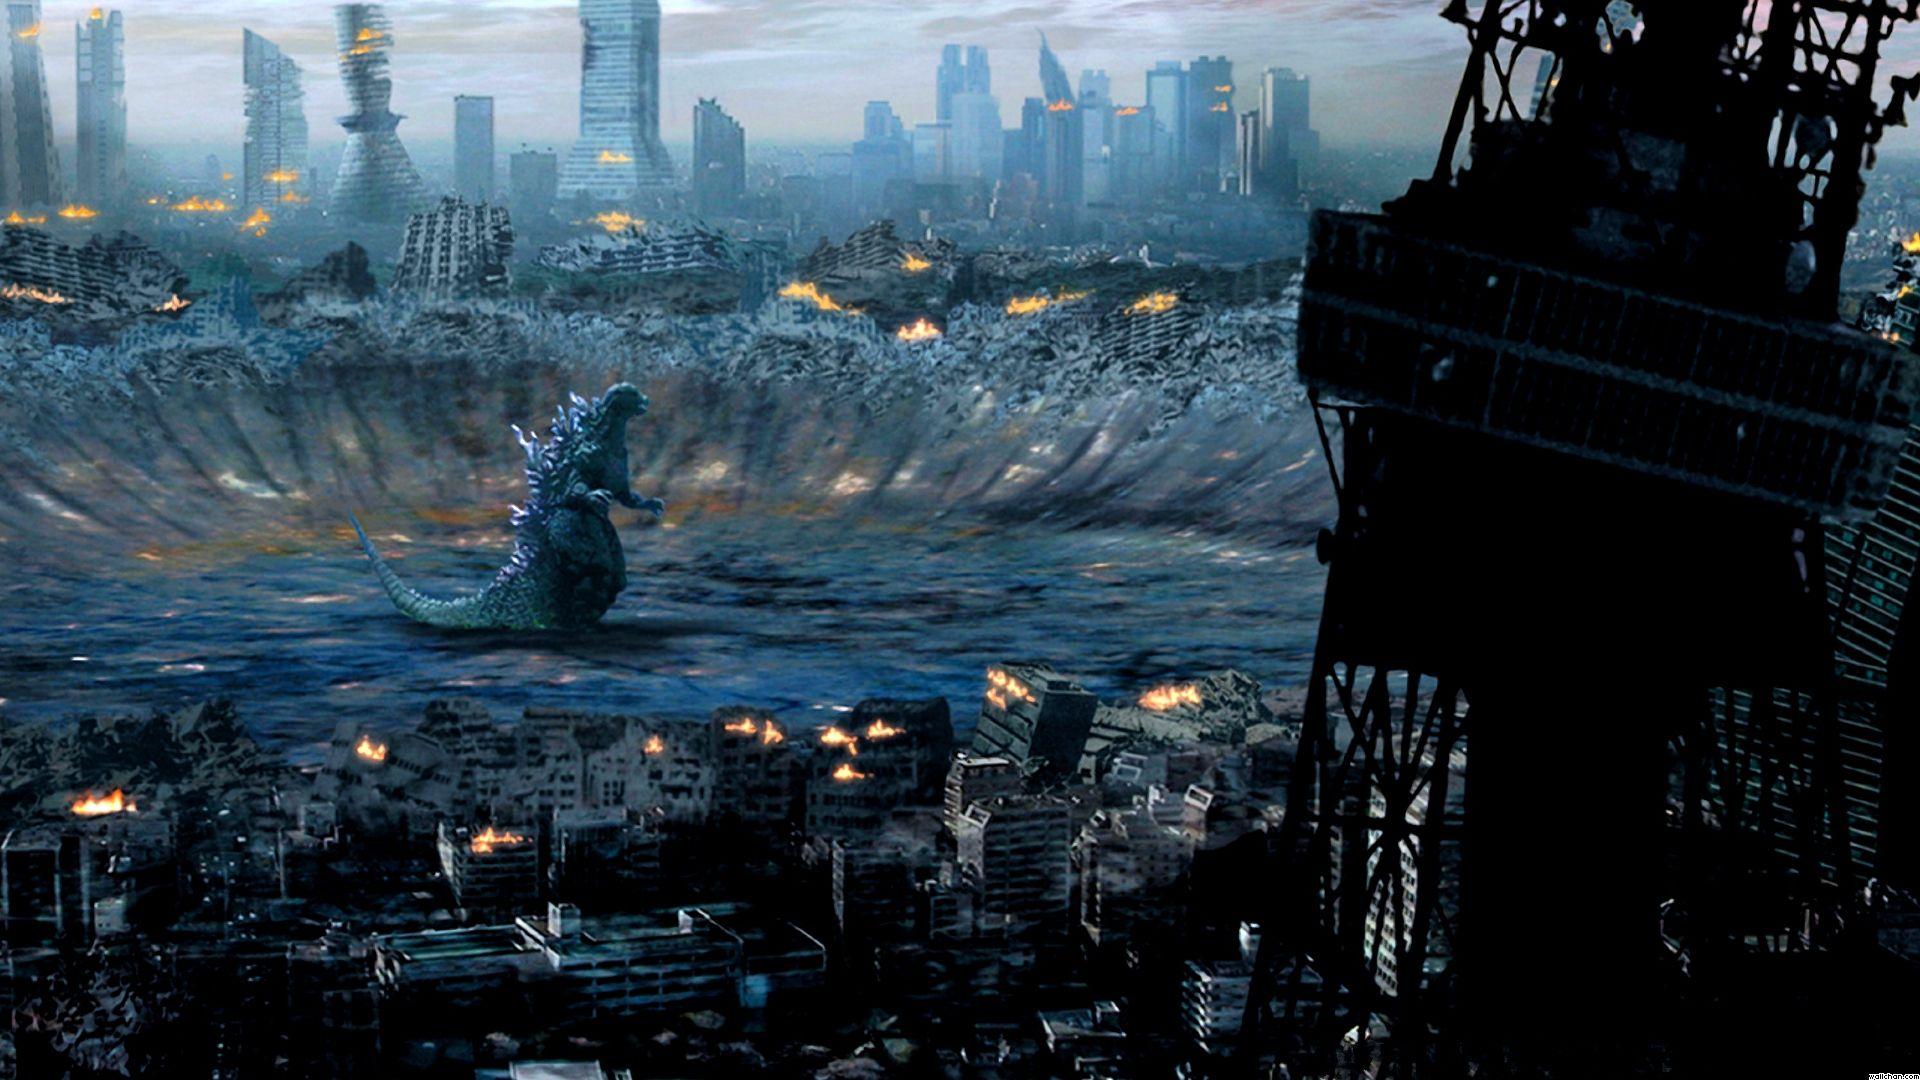 Godzilla Full HD Wallpapers and Backgrounds Image